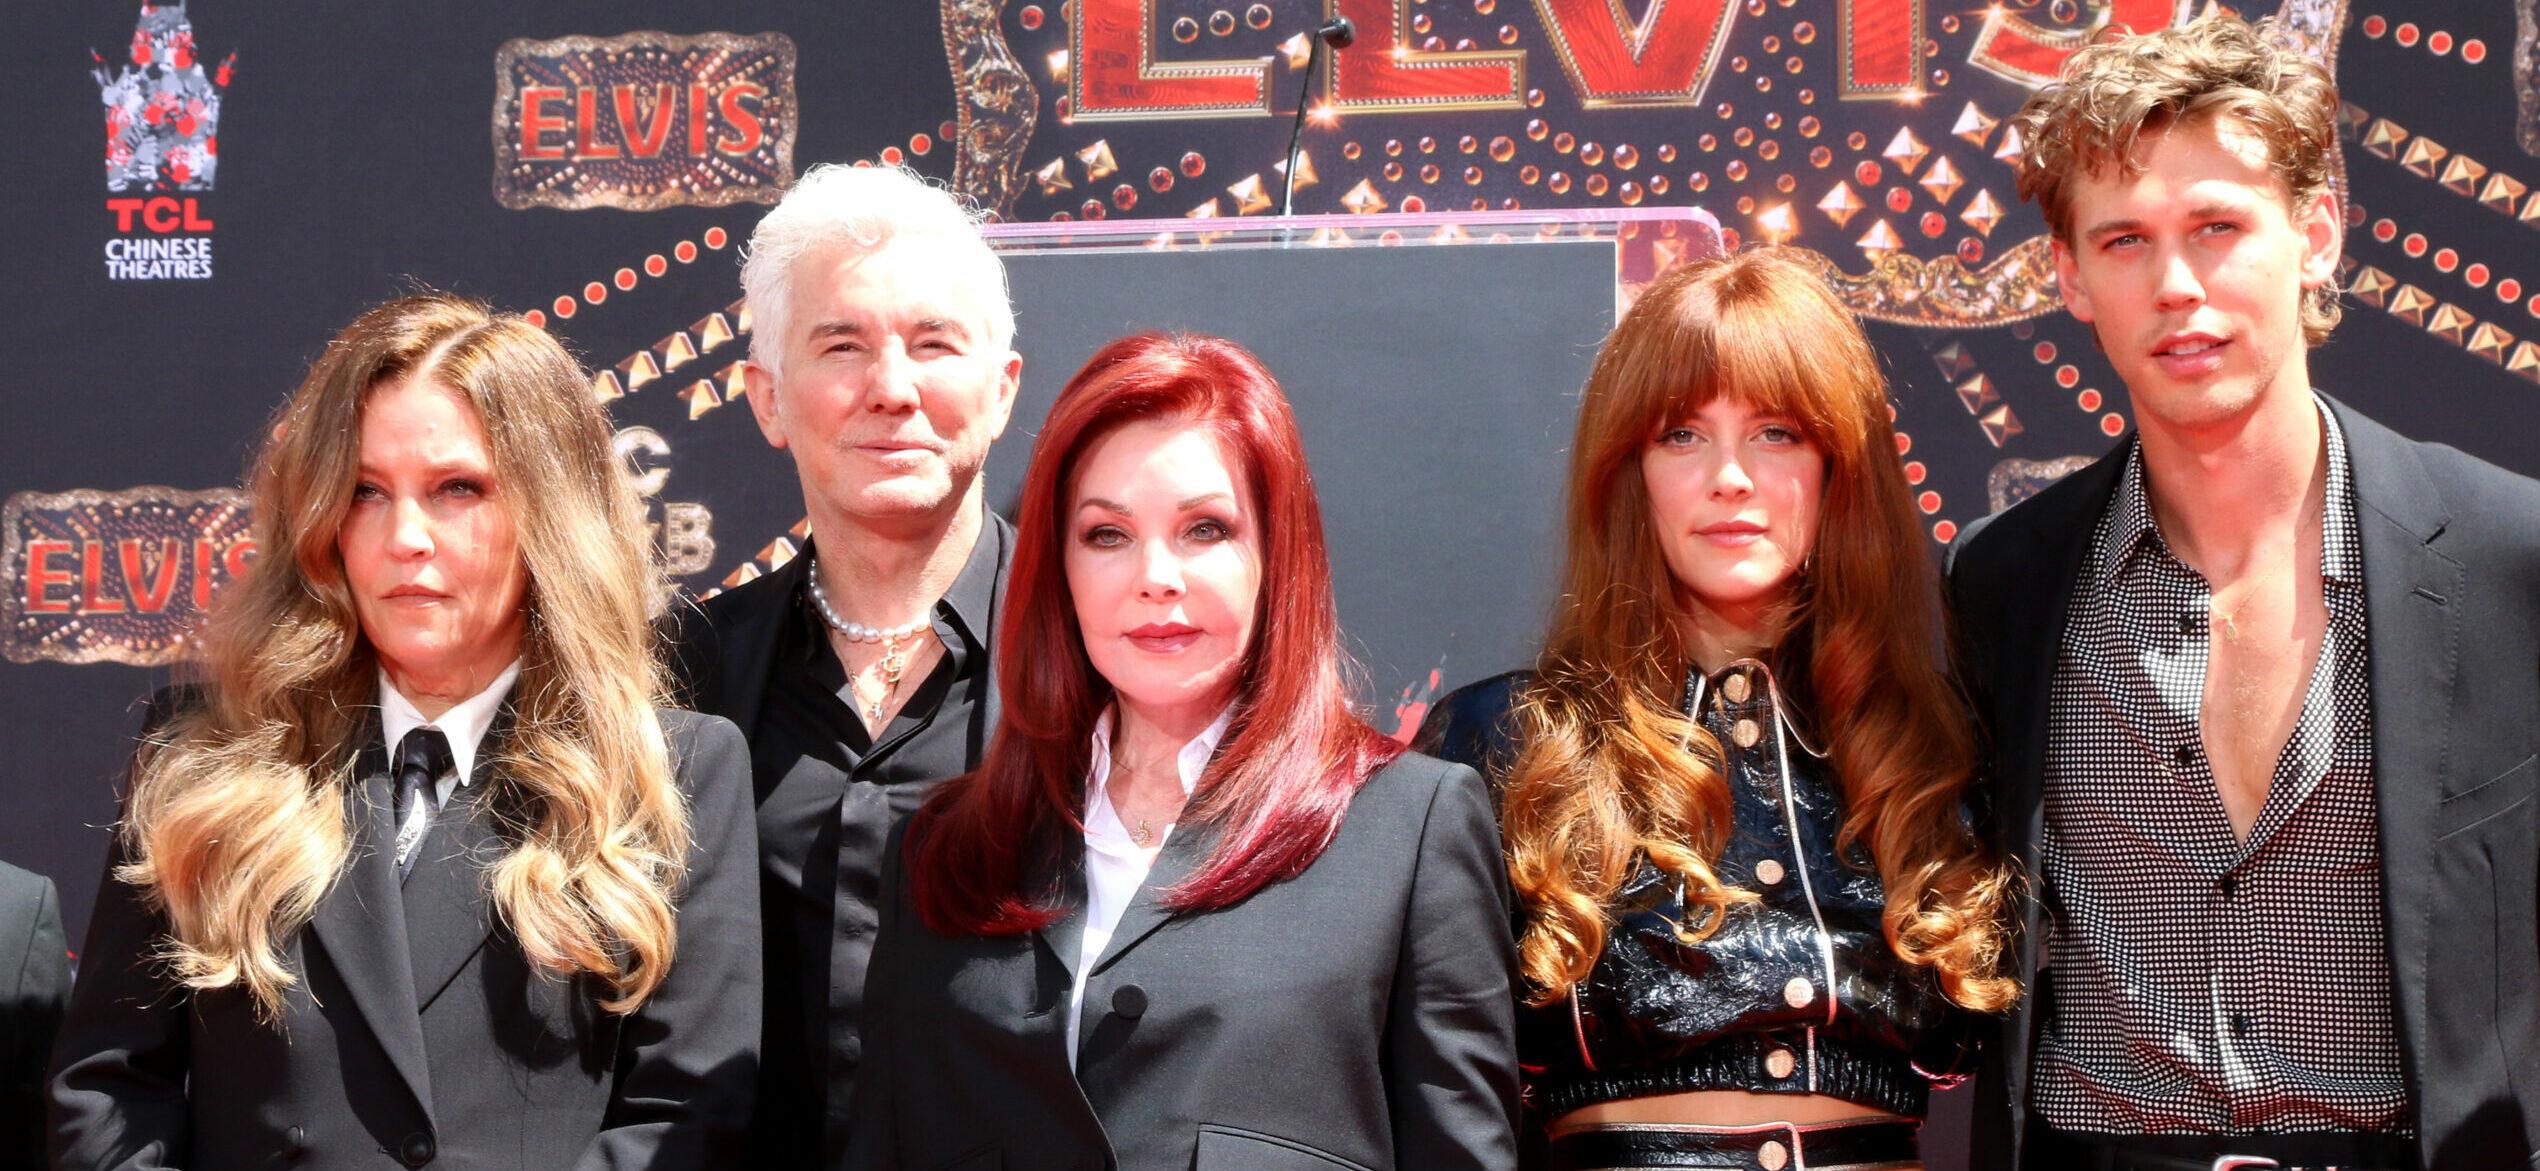 Elvis’ Director Baz Luhrmann Talks Being ‘Forever Linked’ To Lisa Marie Presley’s Family